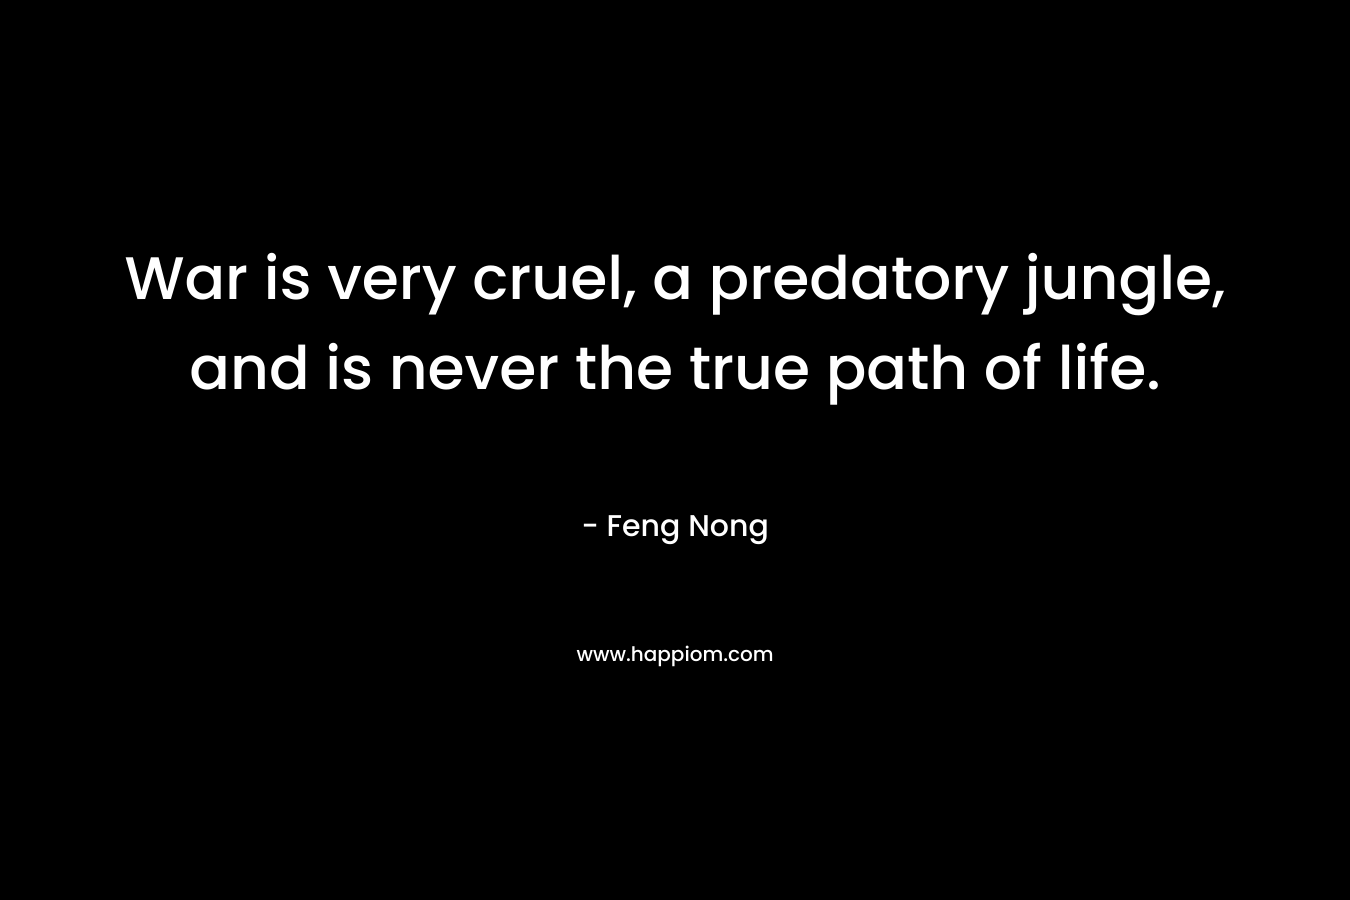 War is very cruel, a predatory jungle, and is never the true path of life. – Feng Nong